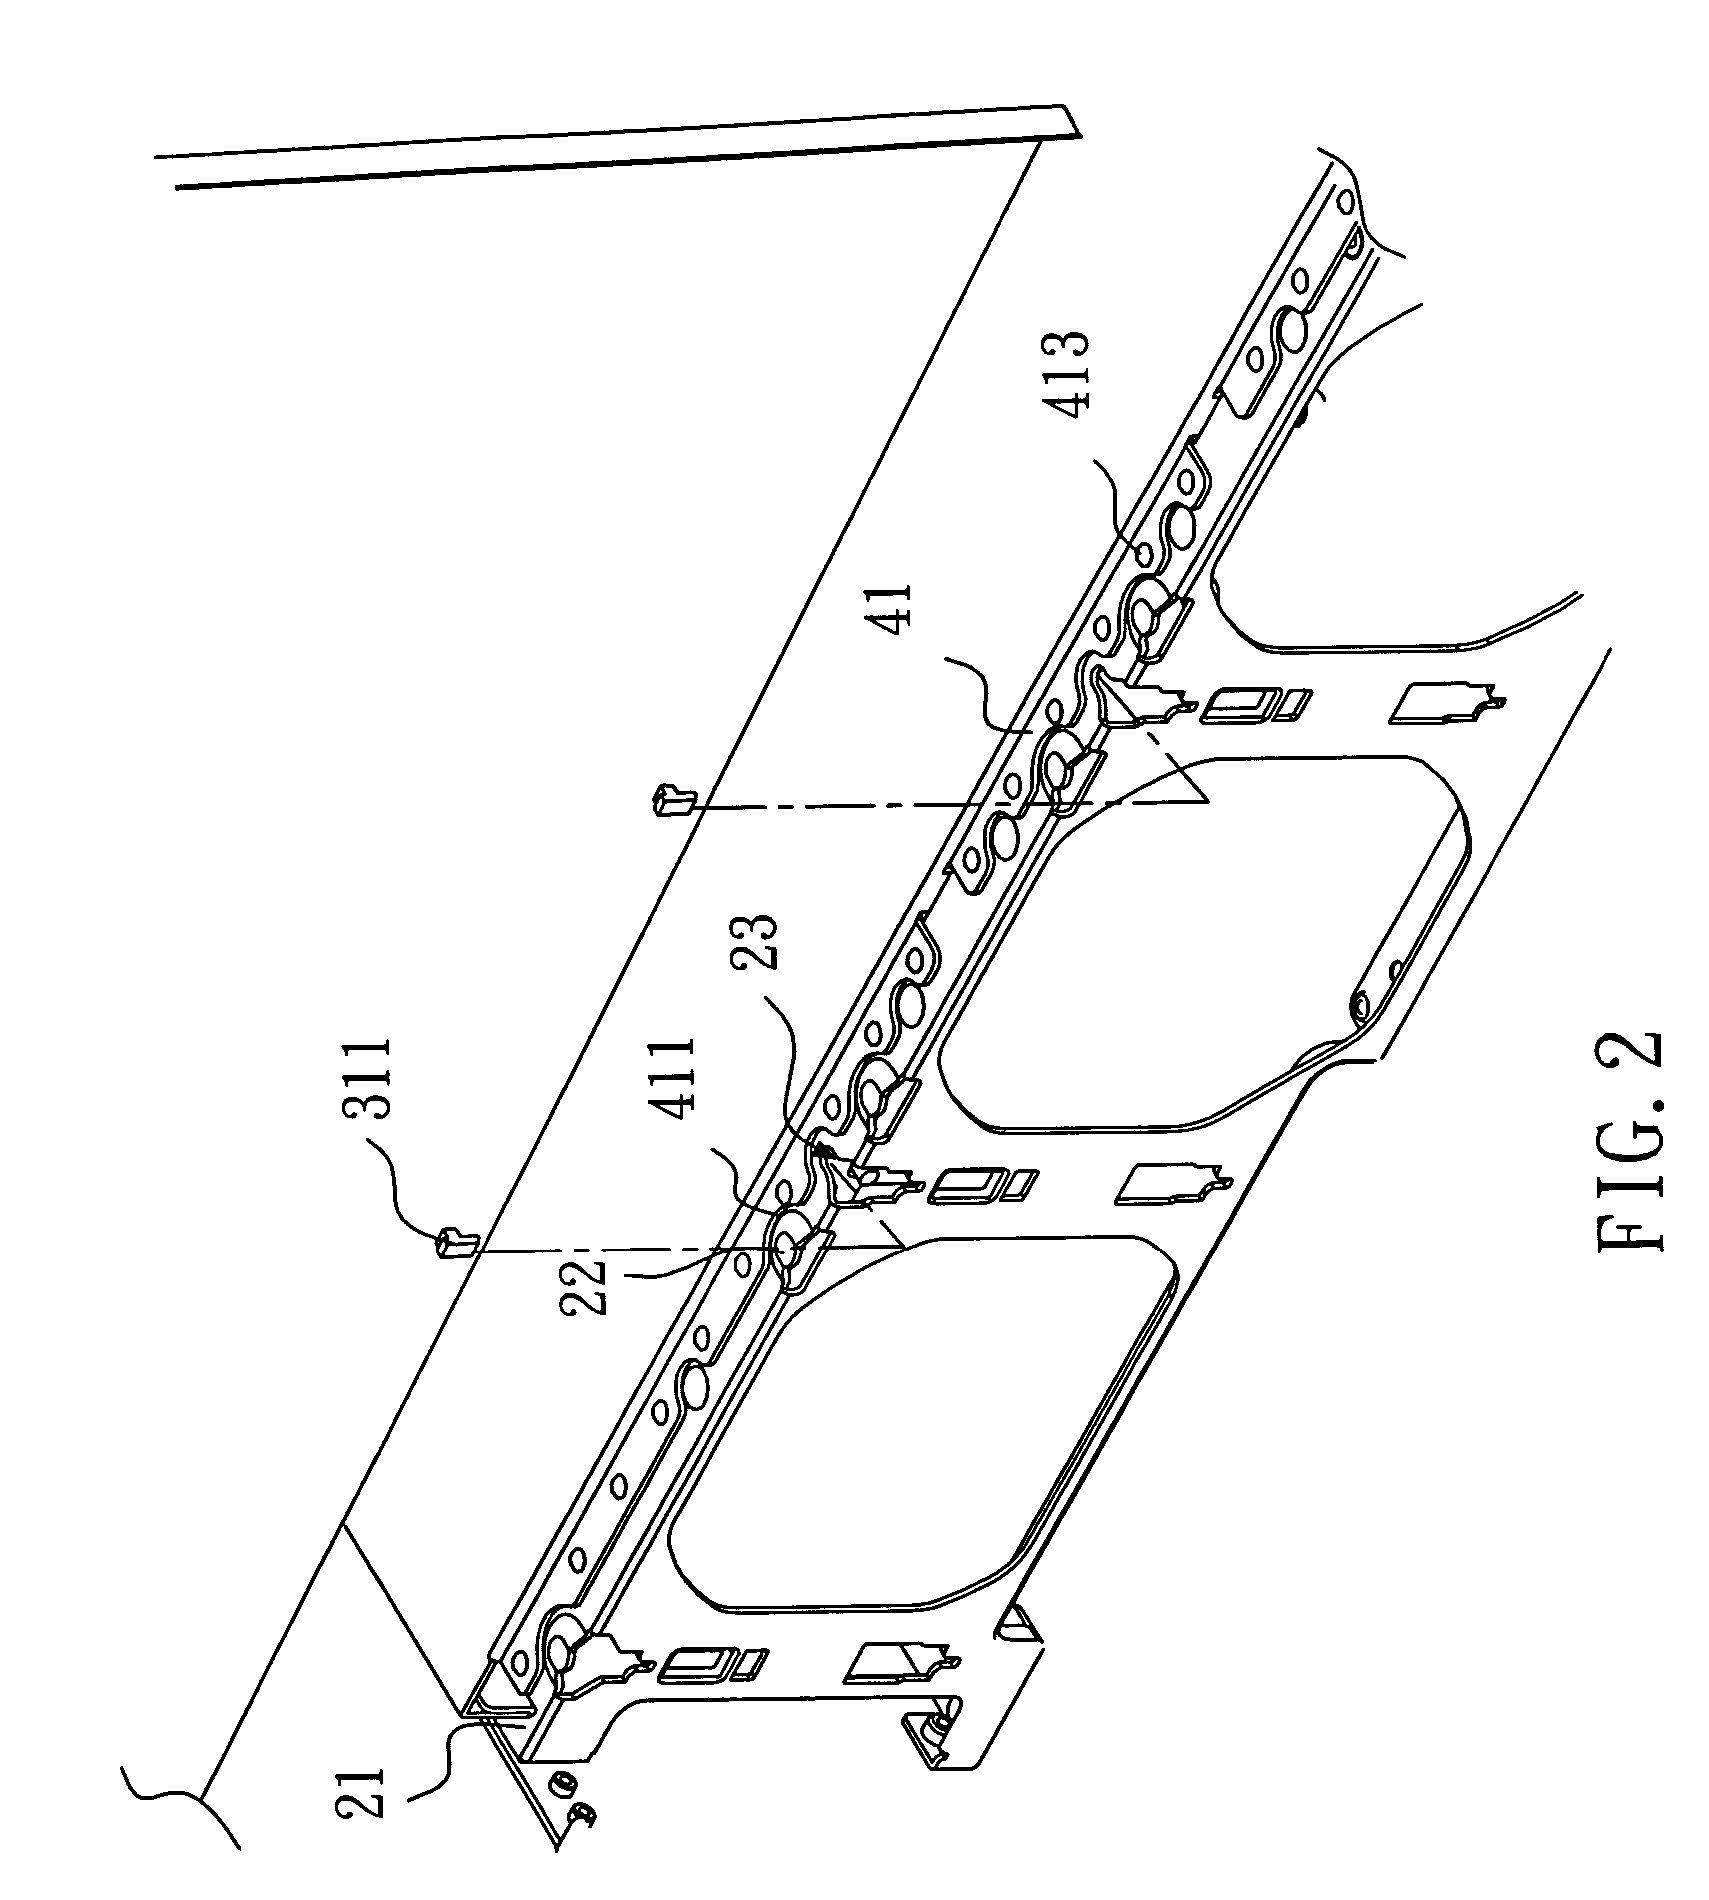 Detachable case assembly for computer server